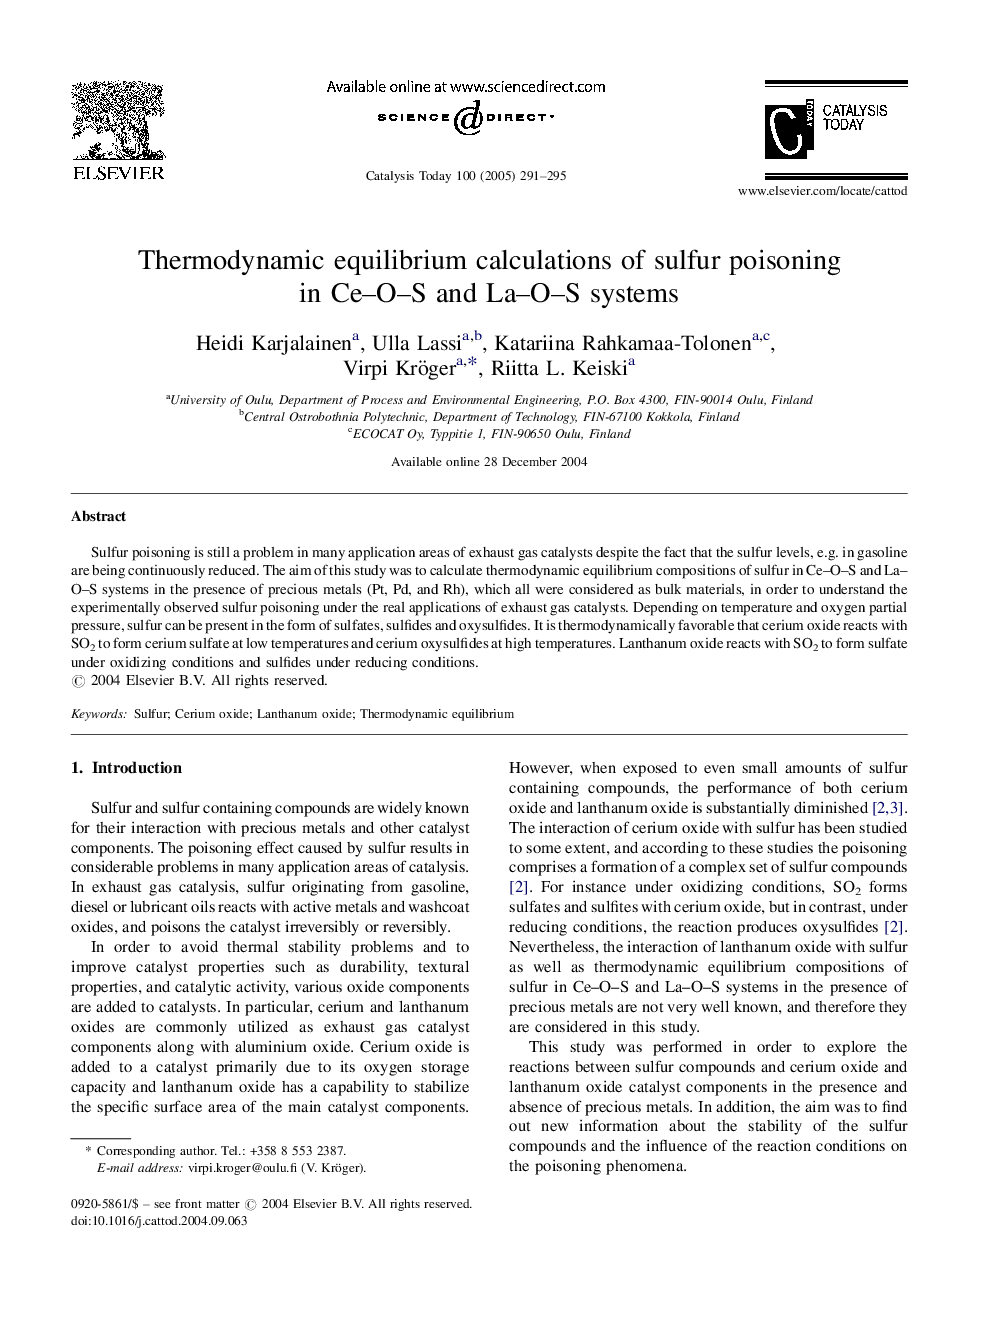 Thermodynamic equilibrium calculations of sulfur poisoning in Ce-O-S and La-O-S systems